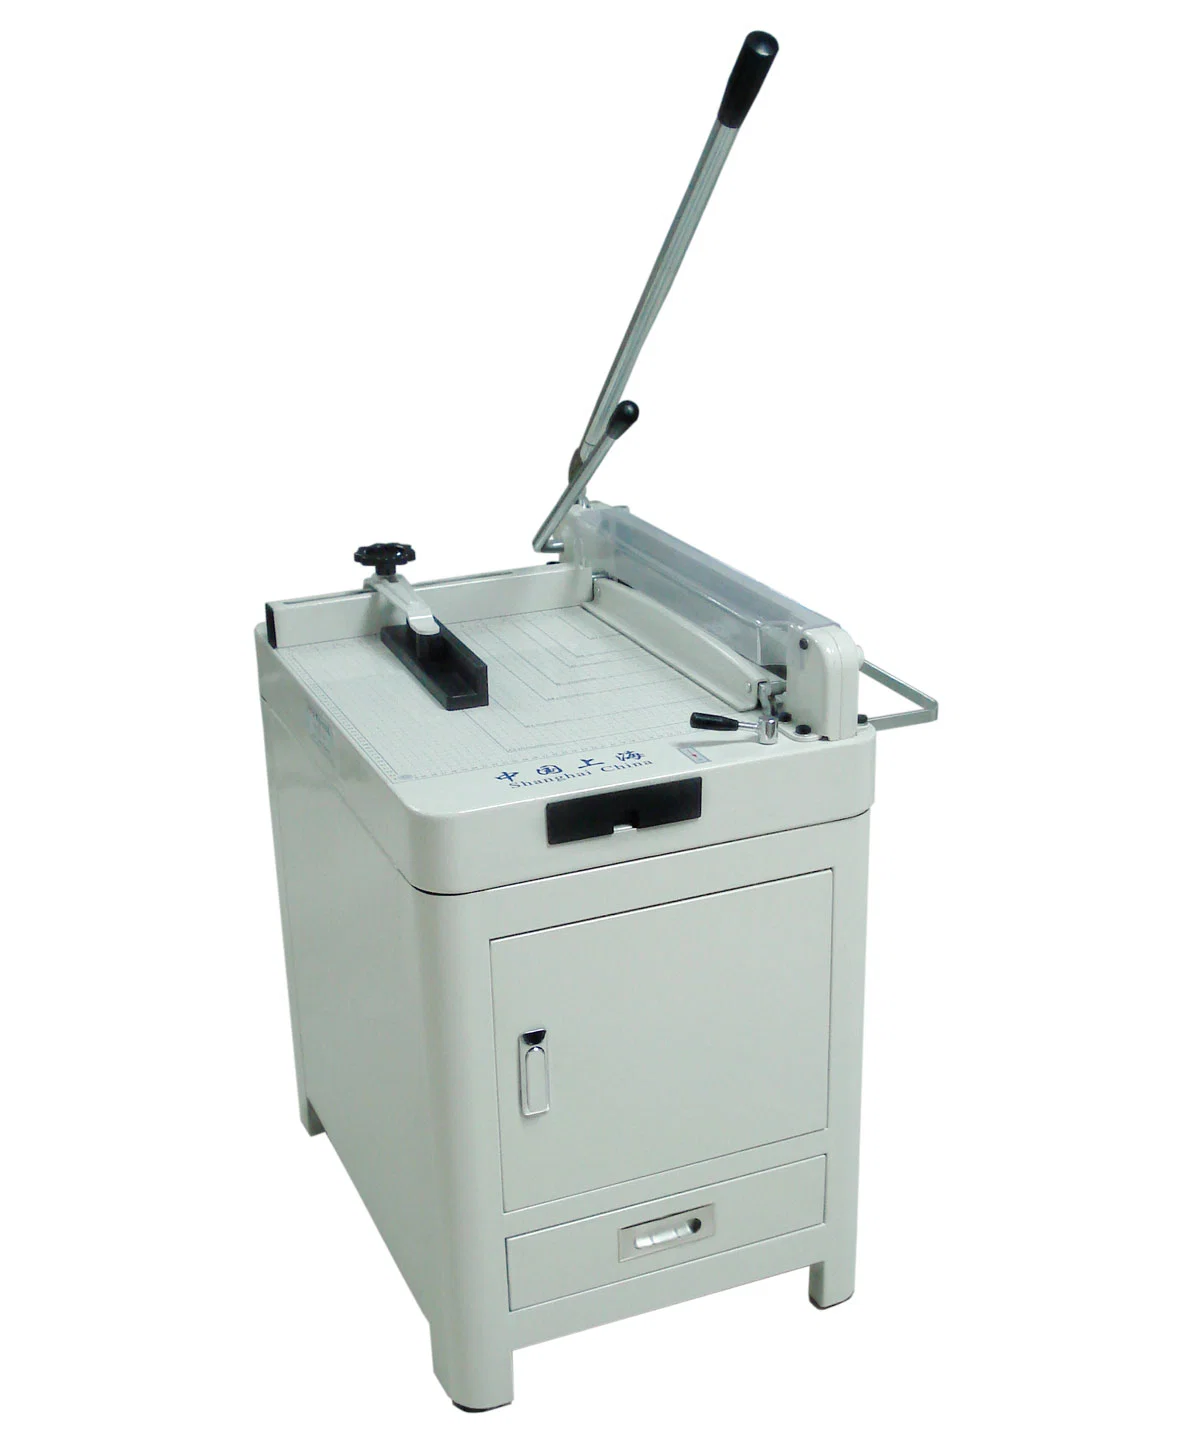 Guillotine Manual Paper Cutter Wd-868A3 with Cabinet